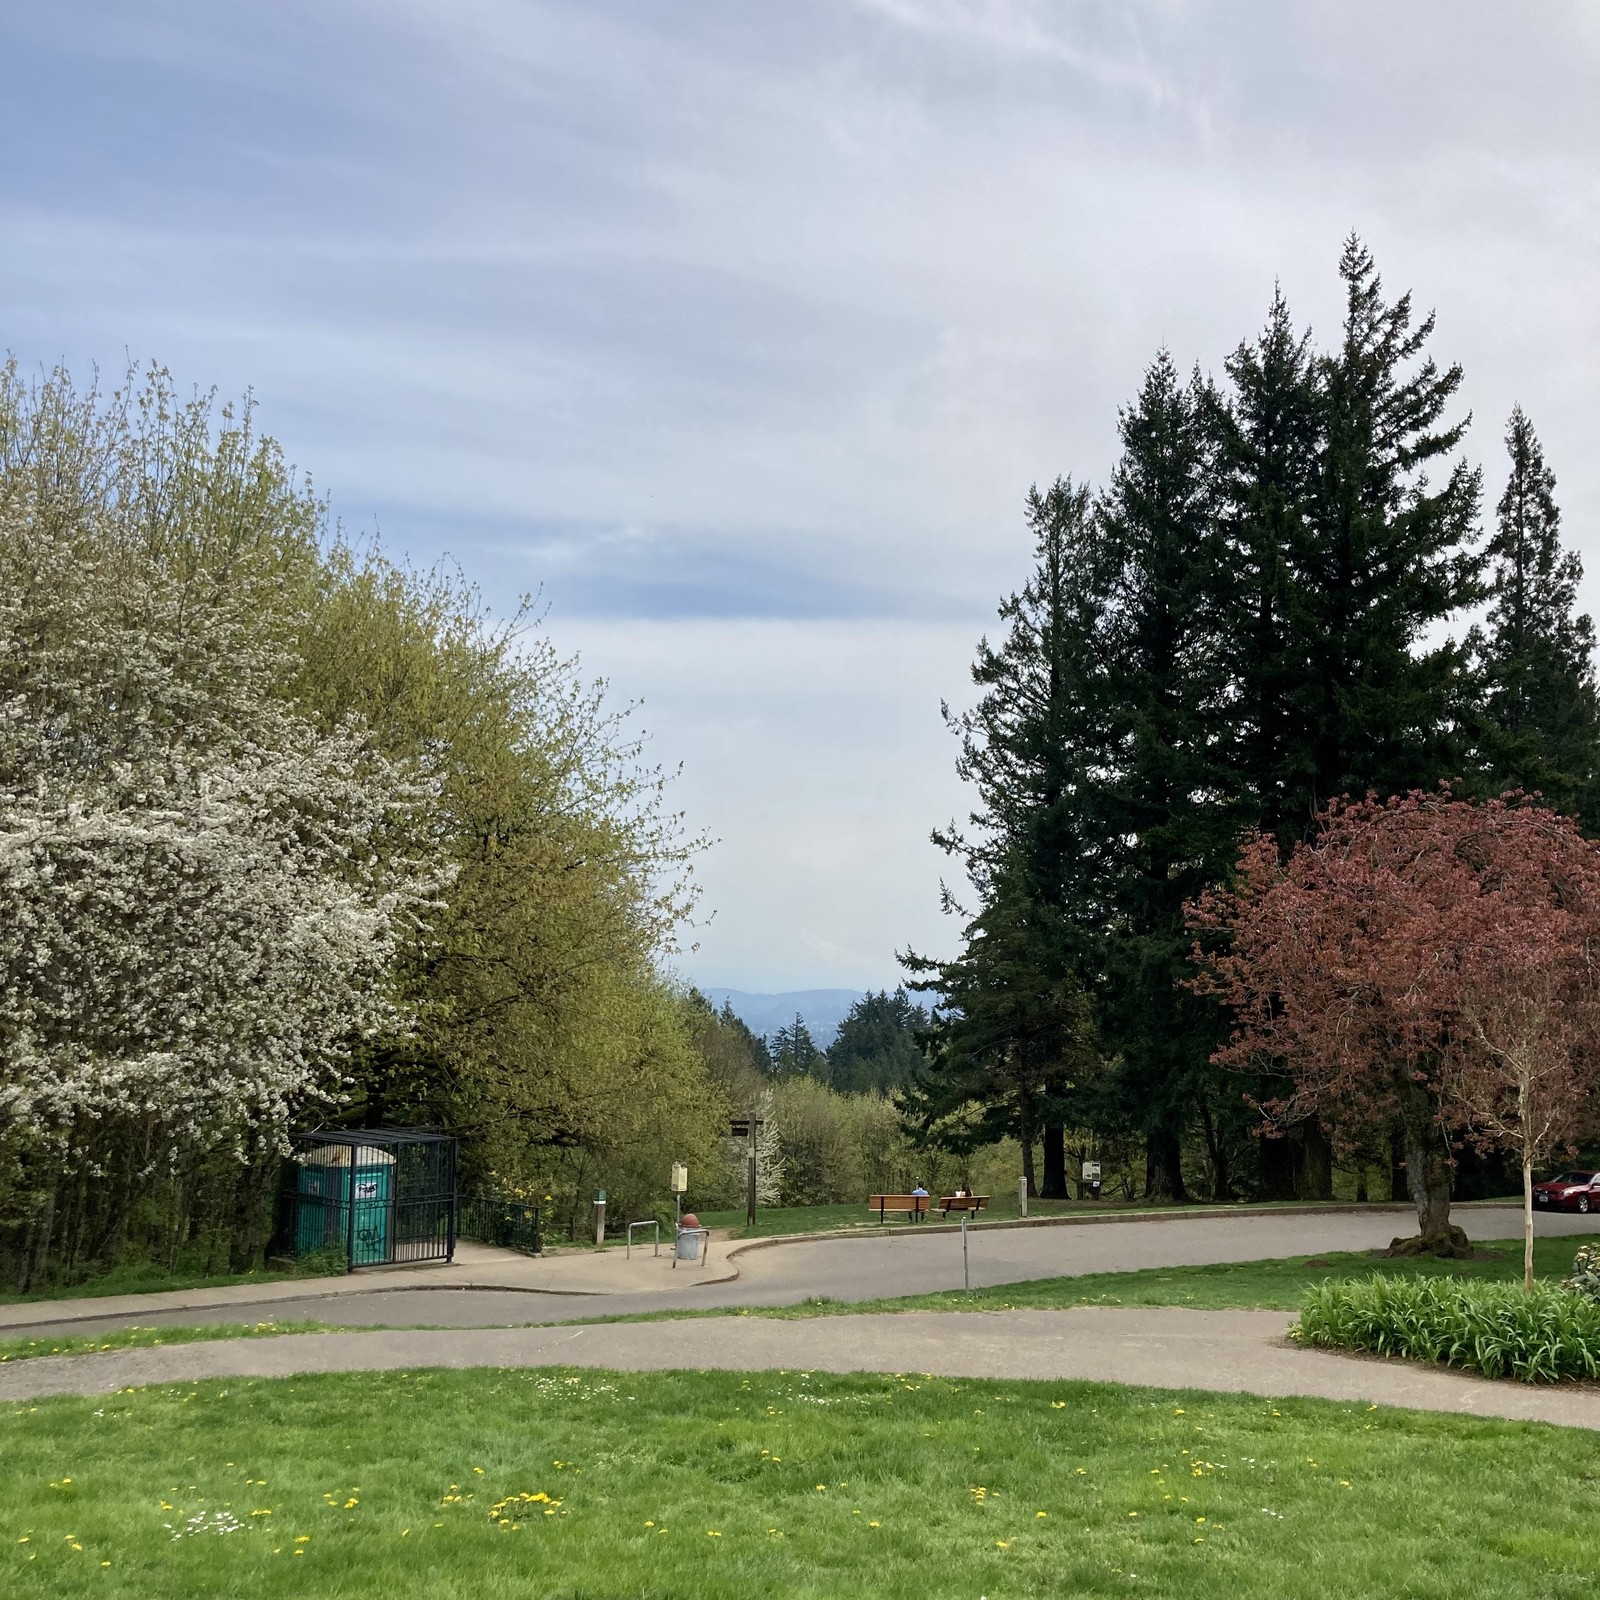 View from Council Crest Park toward Mt. Hood, the outline of which is very faintly apparent in a hazy spring sky. My eyes could see it better than my camera today